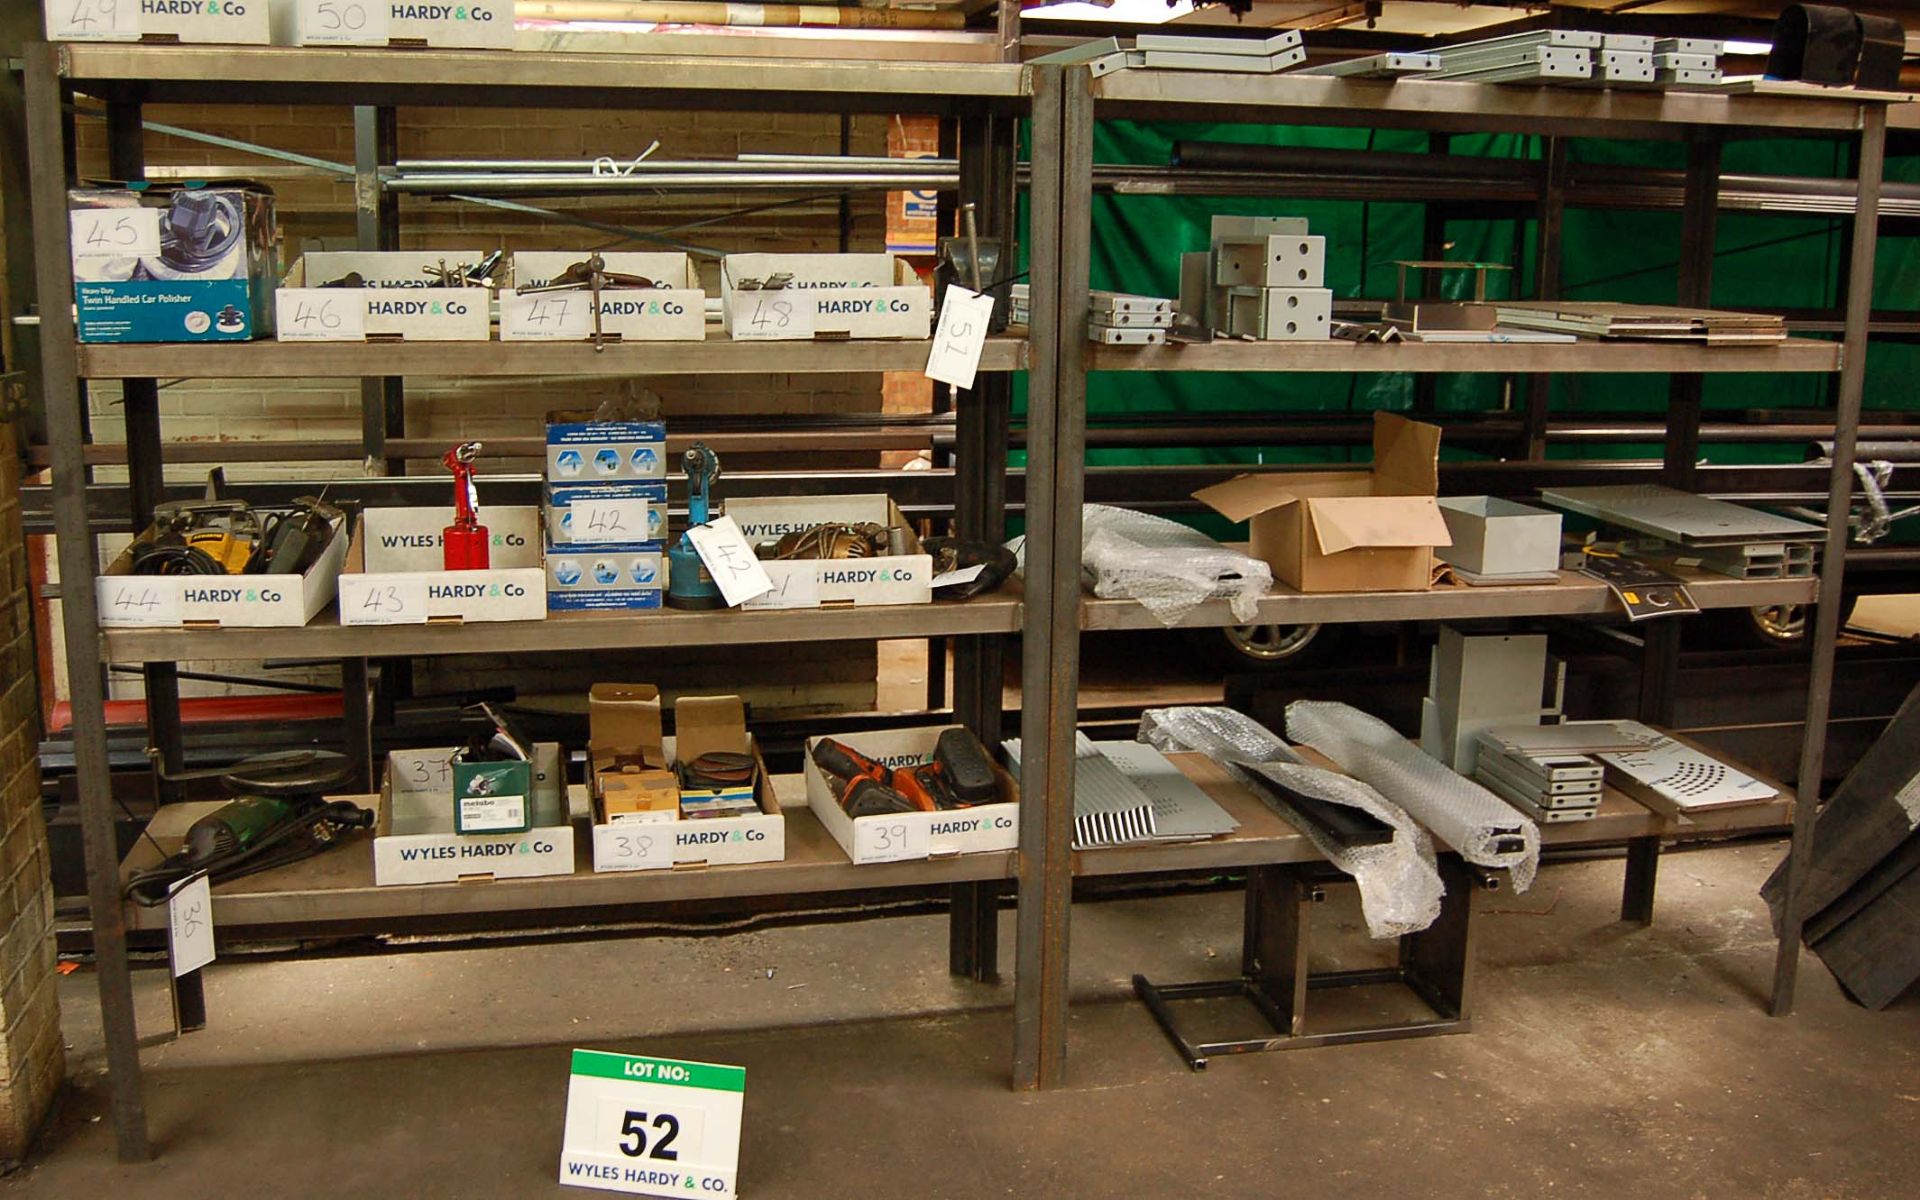 Two Fabricated Steel Racks - 1.8M x 1.5M with fitted Four Shelves (Excludes Contents)